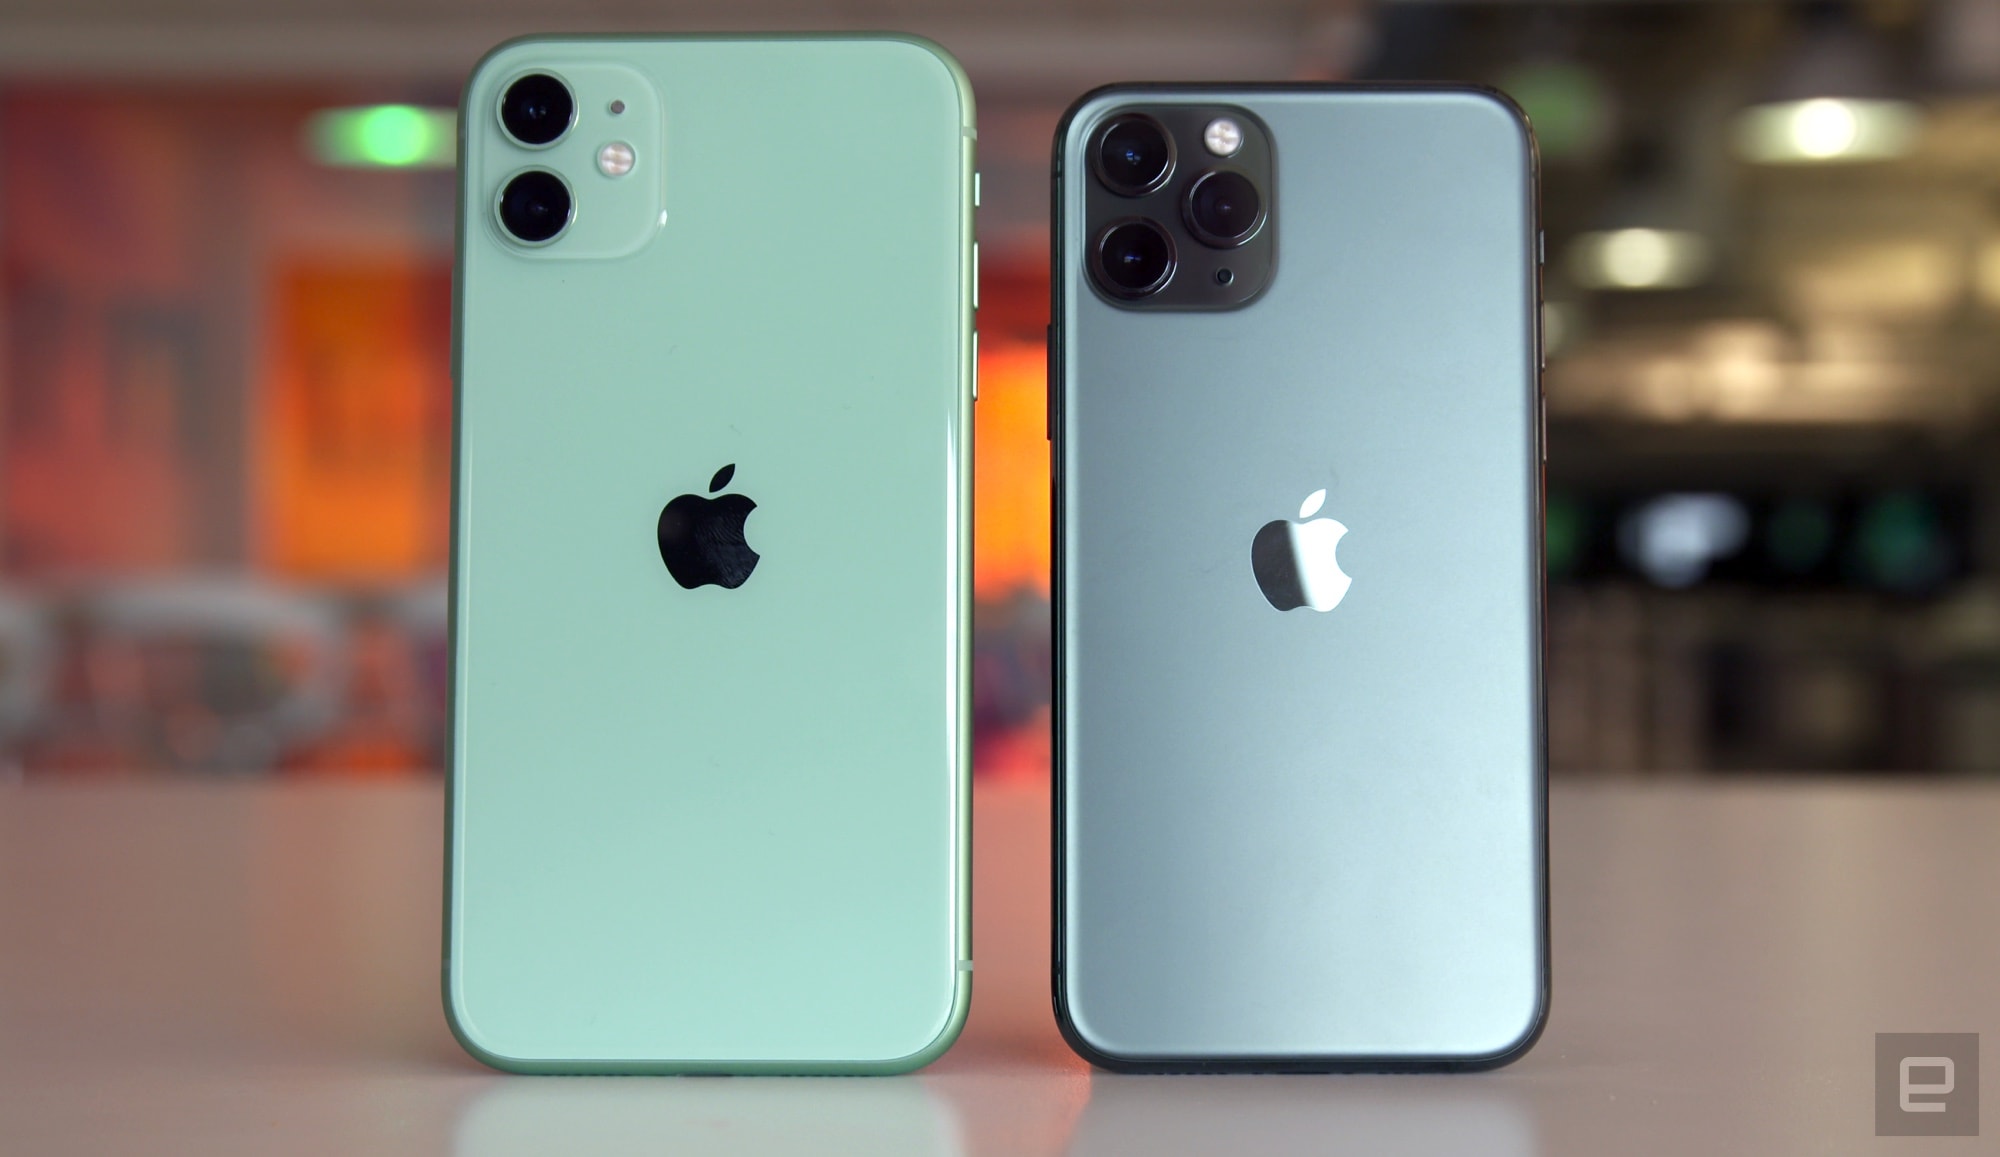 Detail Images Of The Iphone 11 Nomer 23